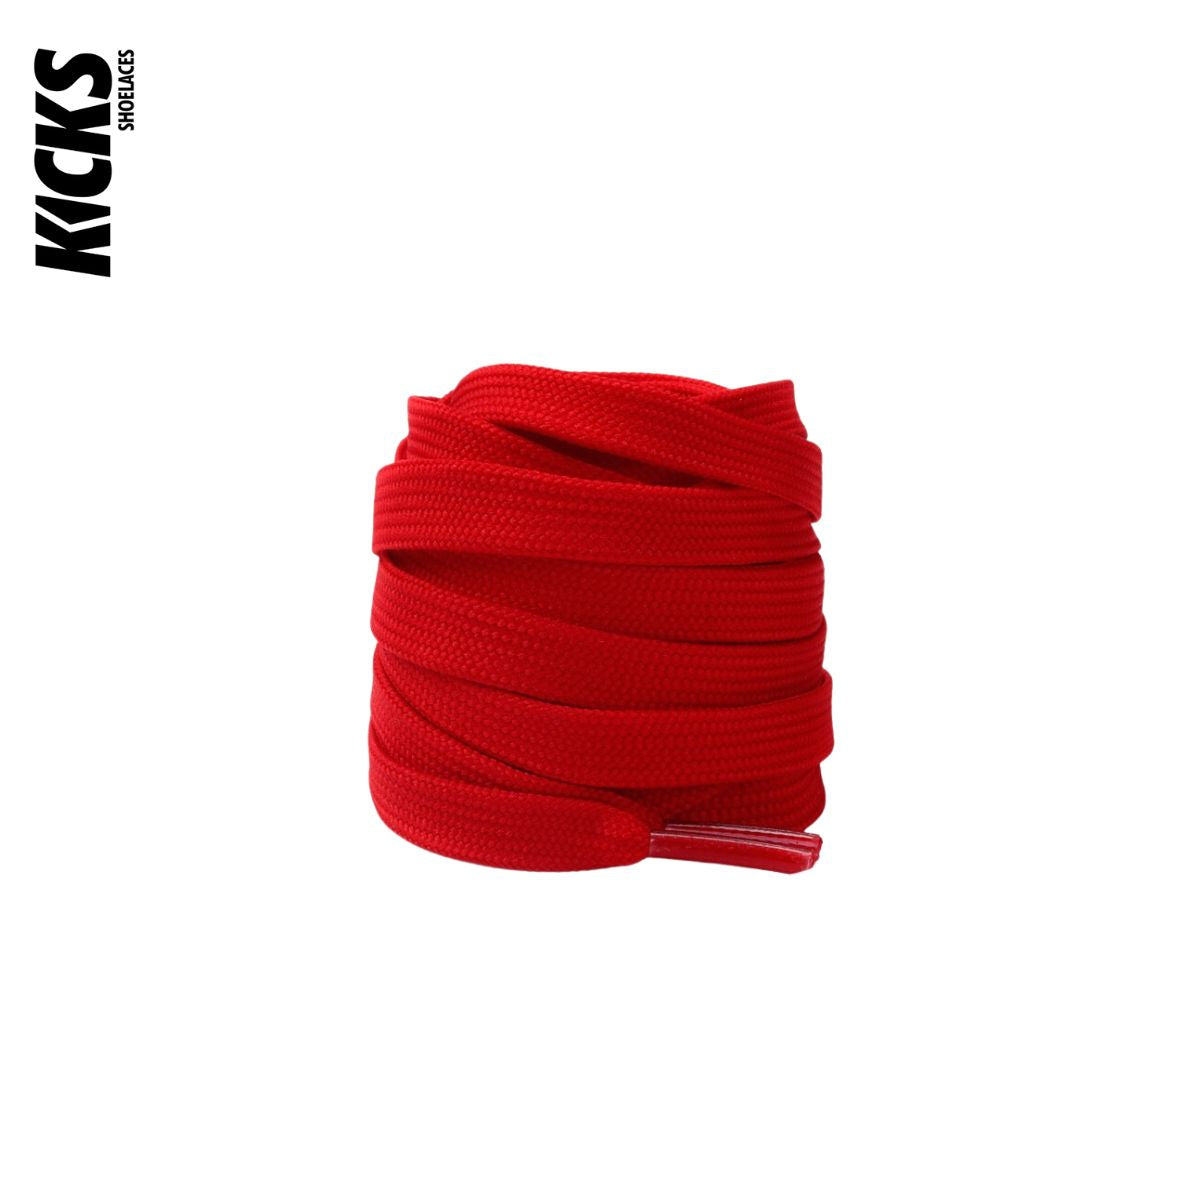 Red Nike Dunks Shoelace Replacements - Kicks Shoelaces